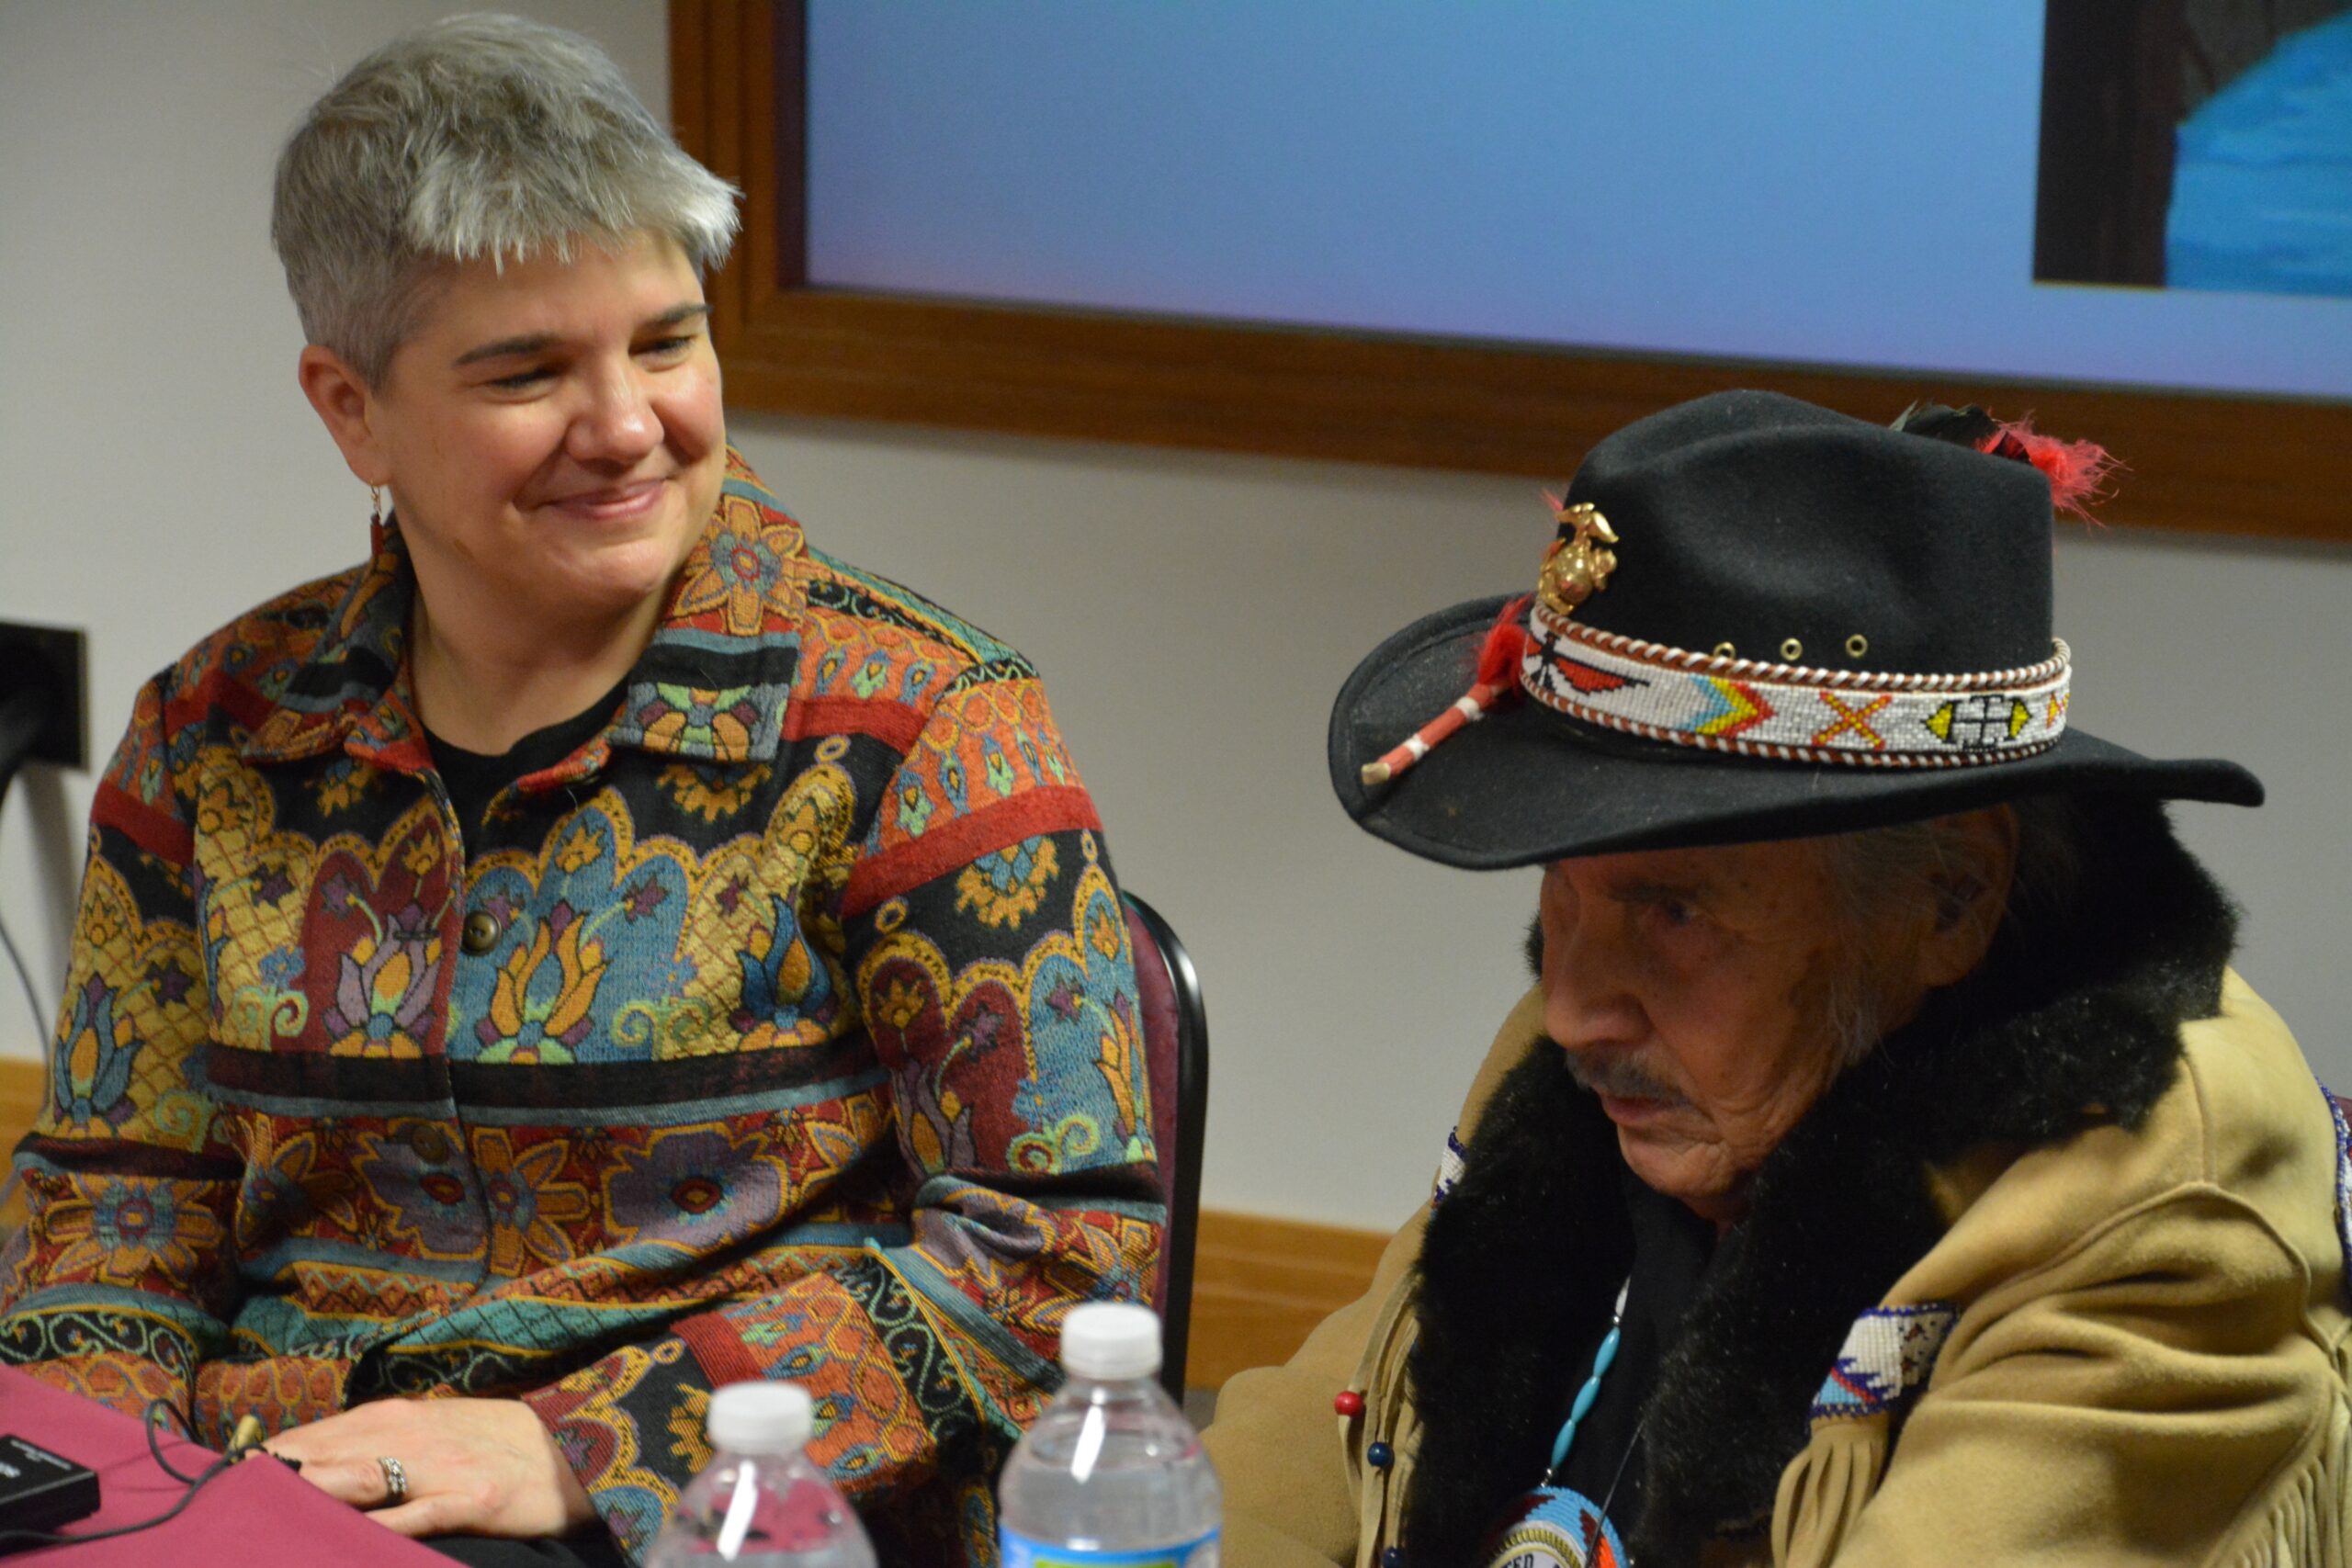 Judith Siers-Poisson and Ray Kaquatosh. Photo: Jennifer Carlson of the Wisconsin Veterans Museum